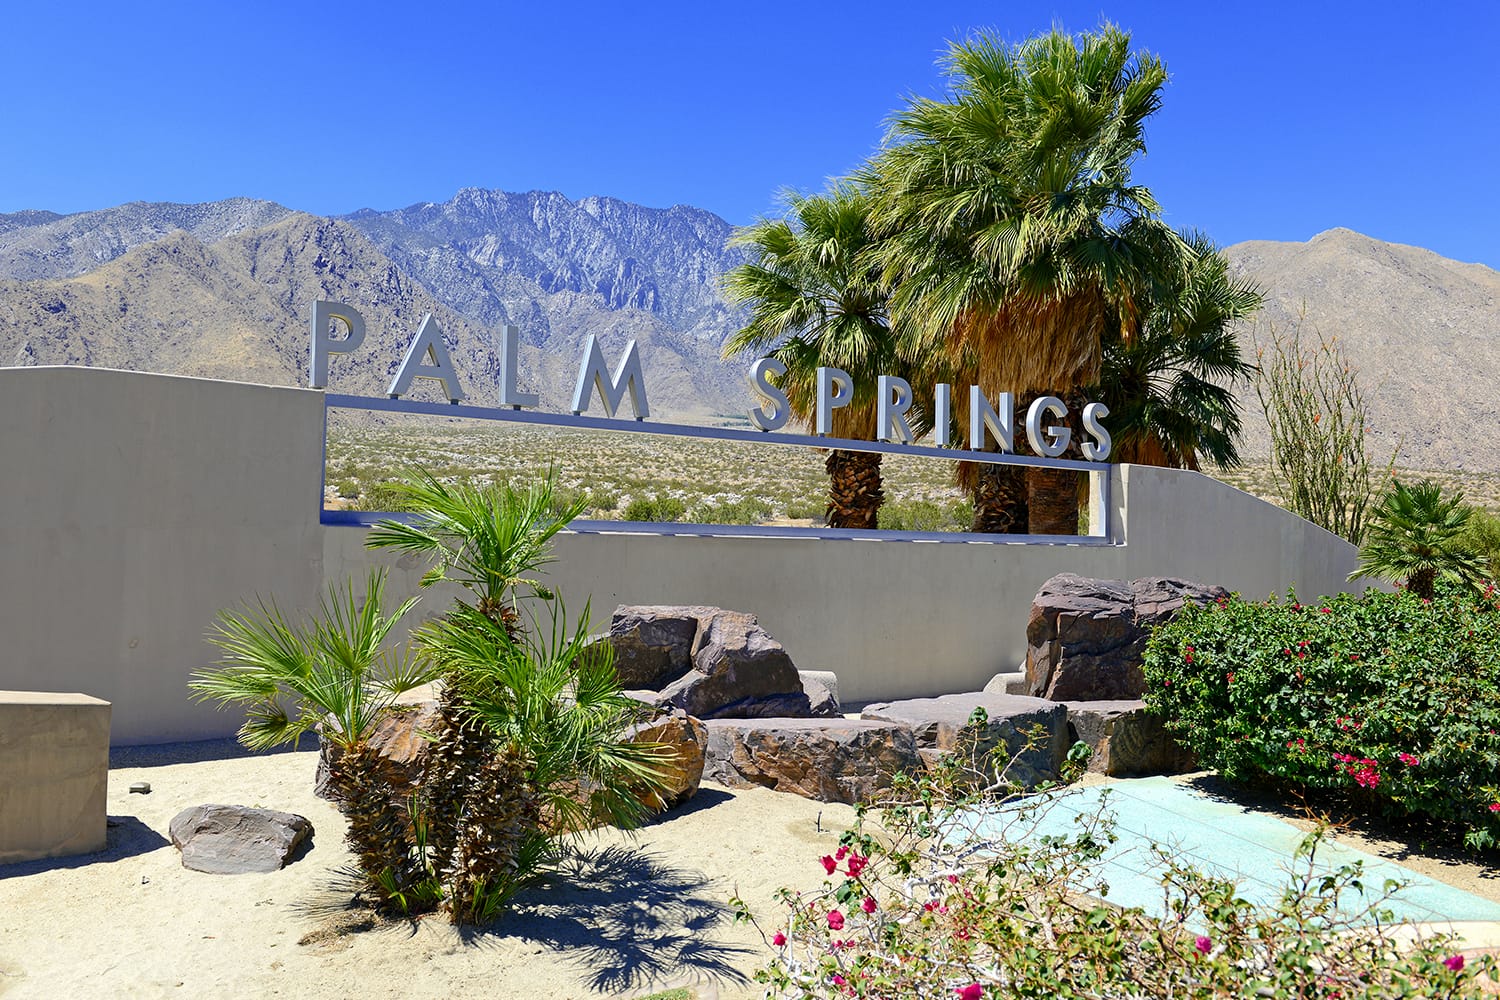 Palm Springs sign with desert background and backdrop of San Jacinto Mountain, California, USA